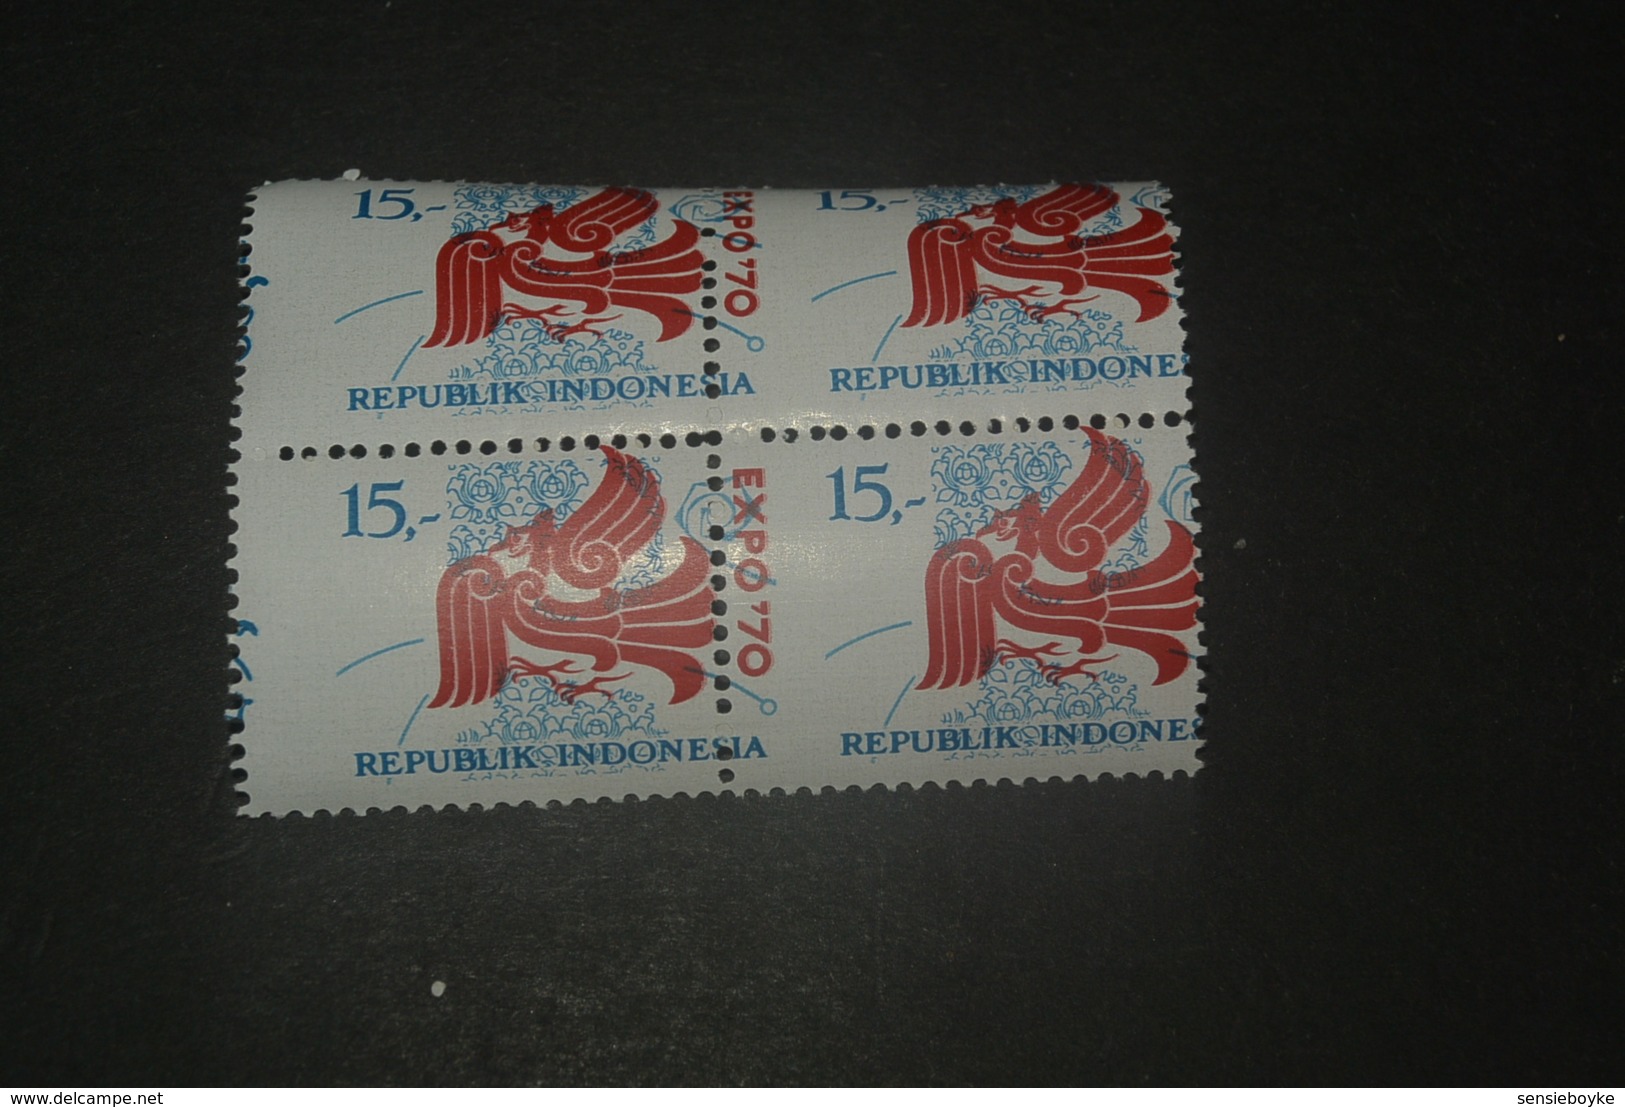 K19771 - Bloc Of 4 Proof   - Wrong Perforation -Print  MNH Indonesia - 1970 - SC. 782 - Expo - Indonesia